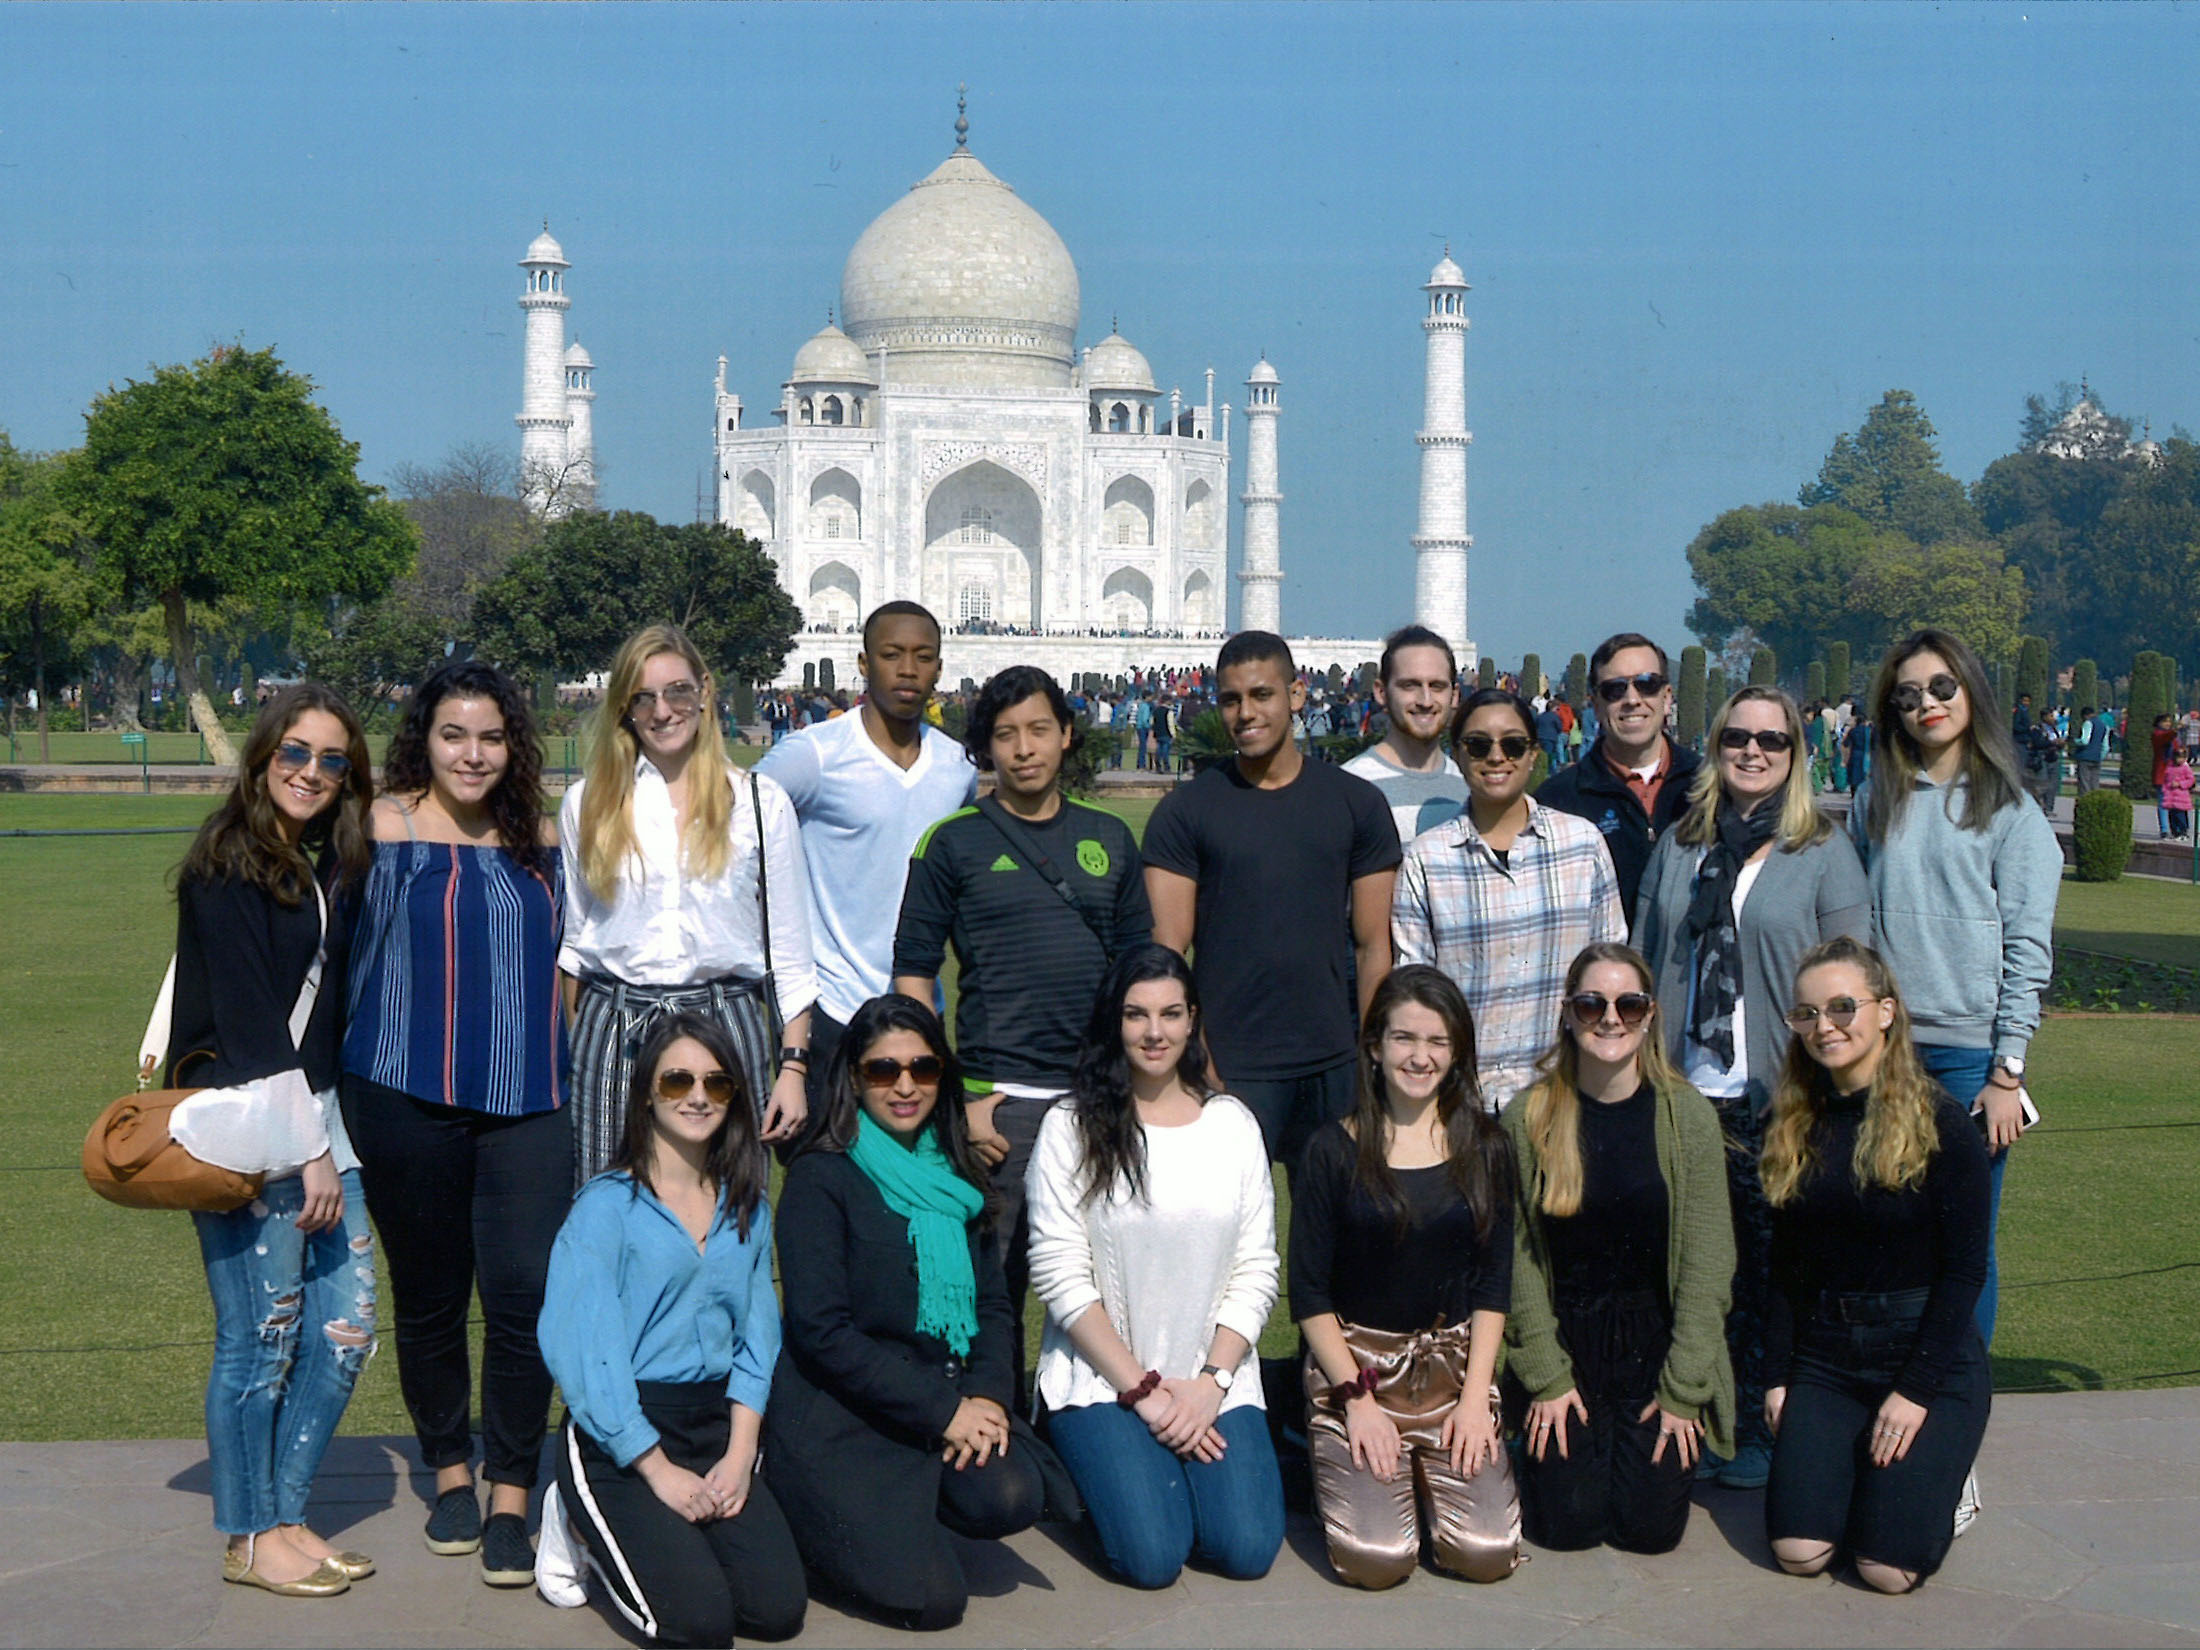 Students and faculty stand in front of the Taj Mahal in Agra, India